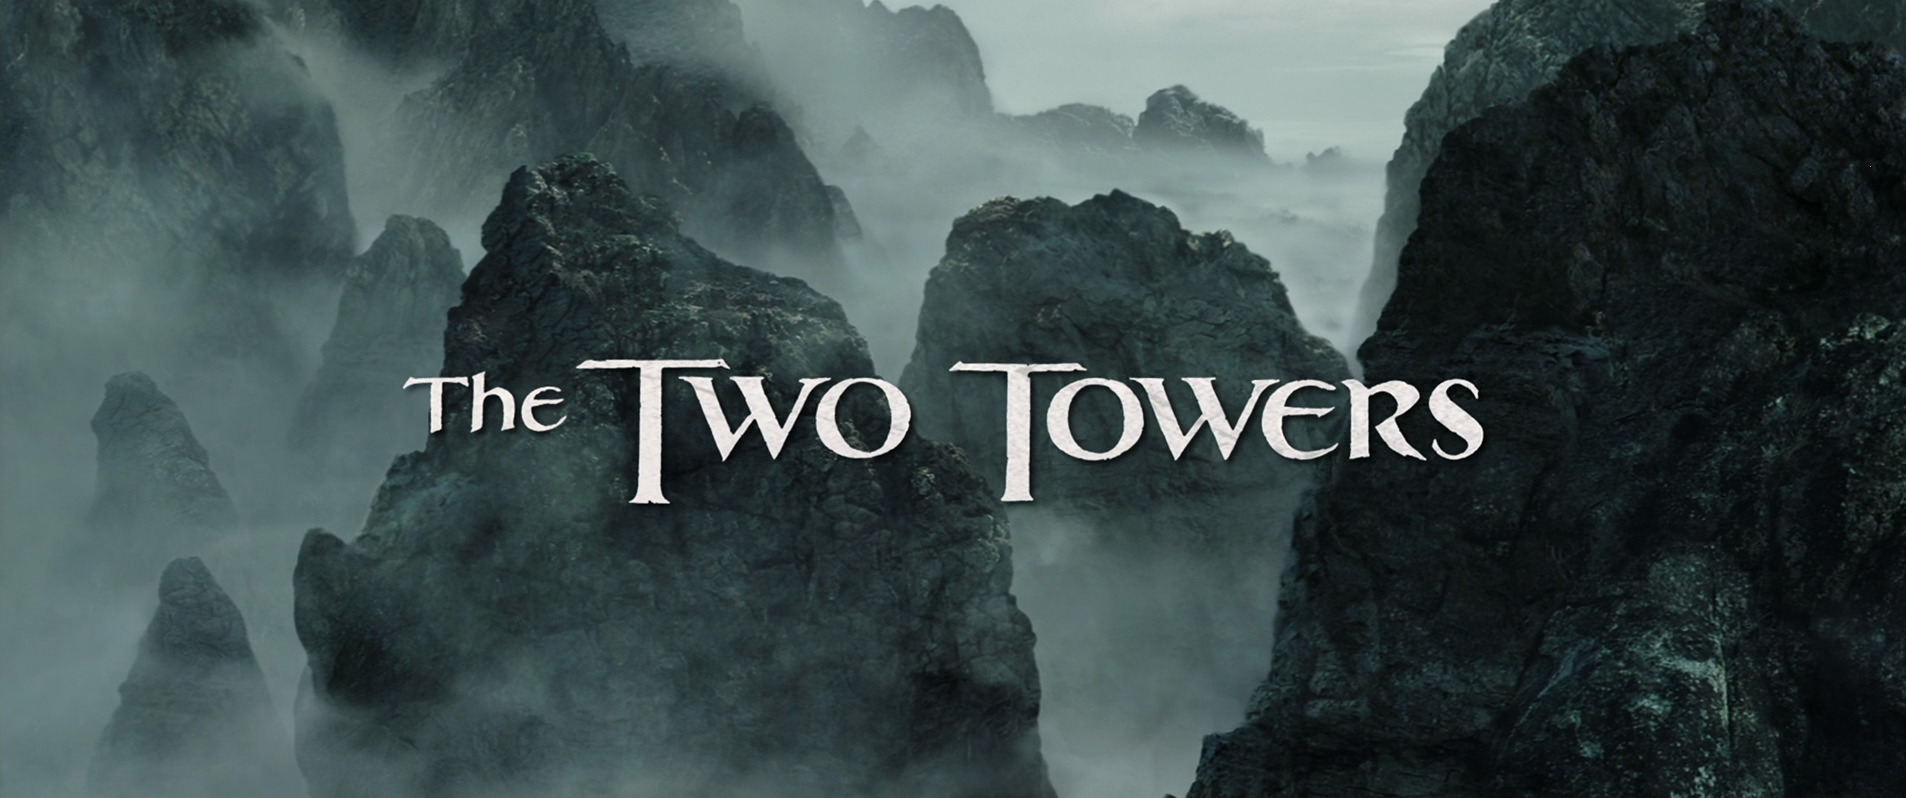 45 Top Photos The Two Towers Movie Review / The Walk 2015 Film Wikipedia